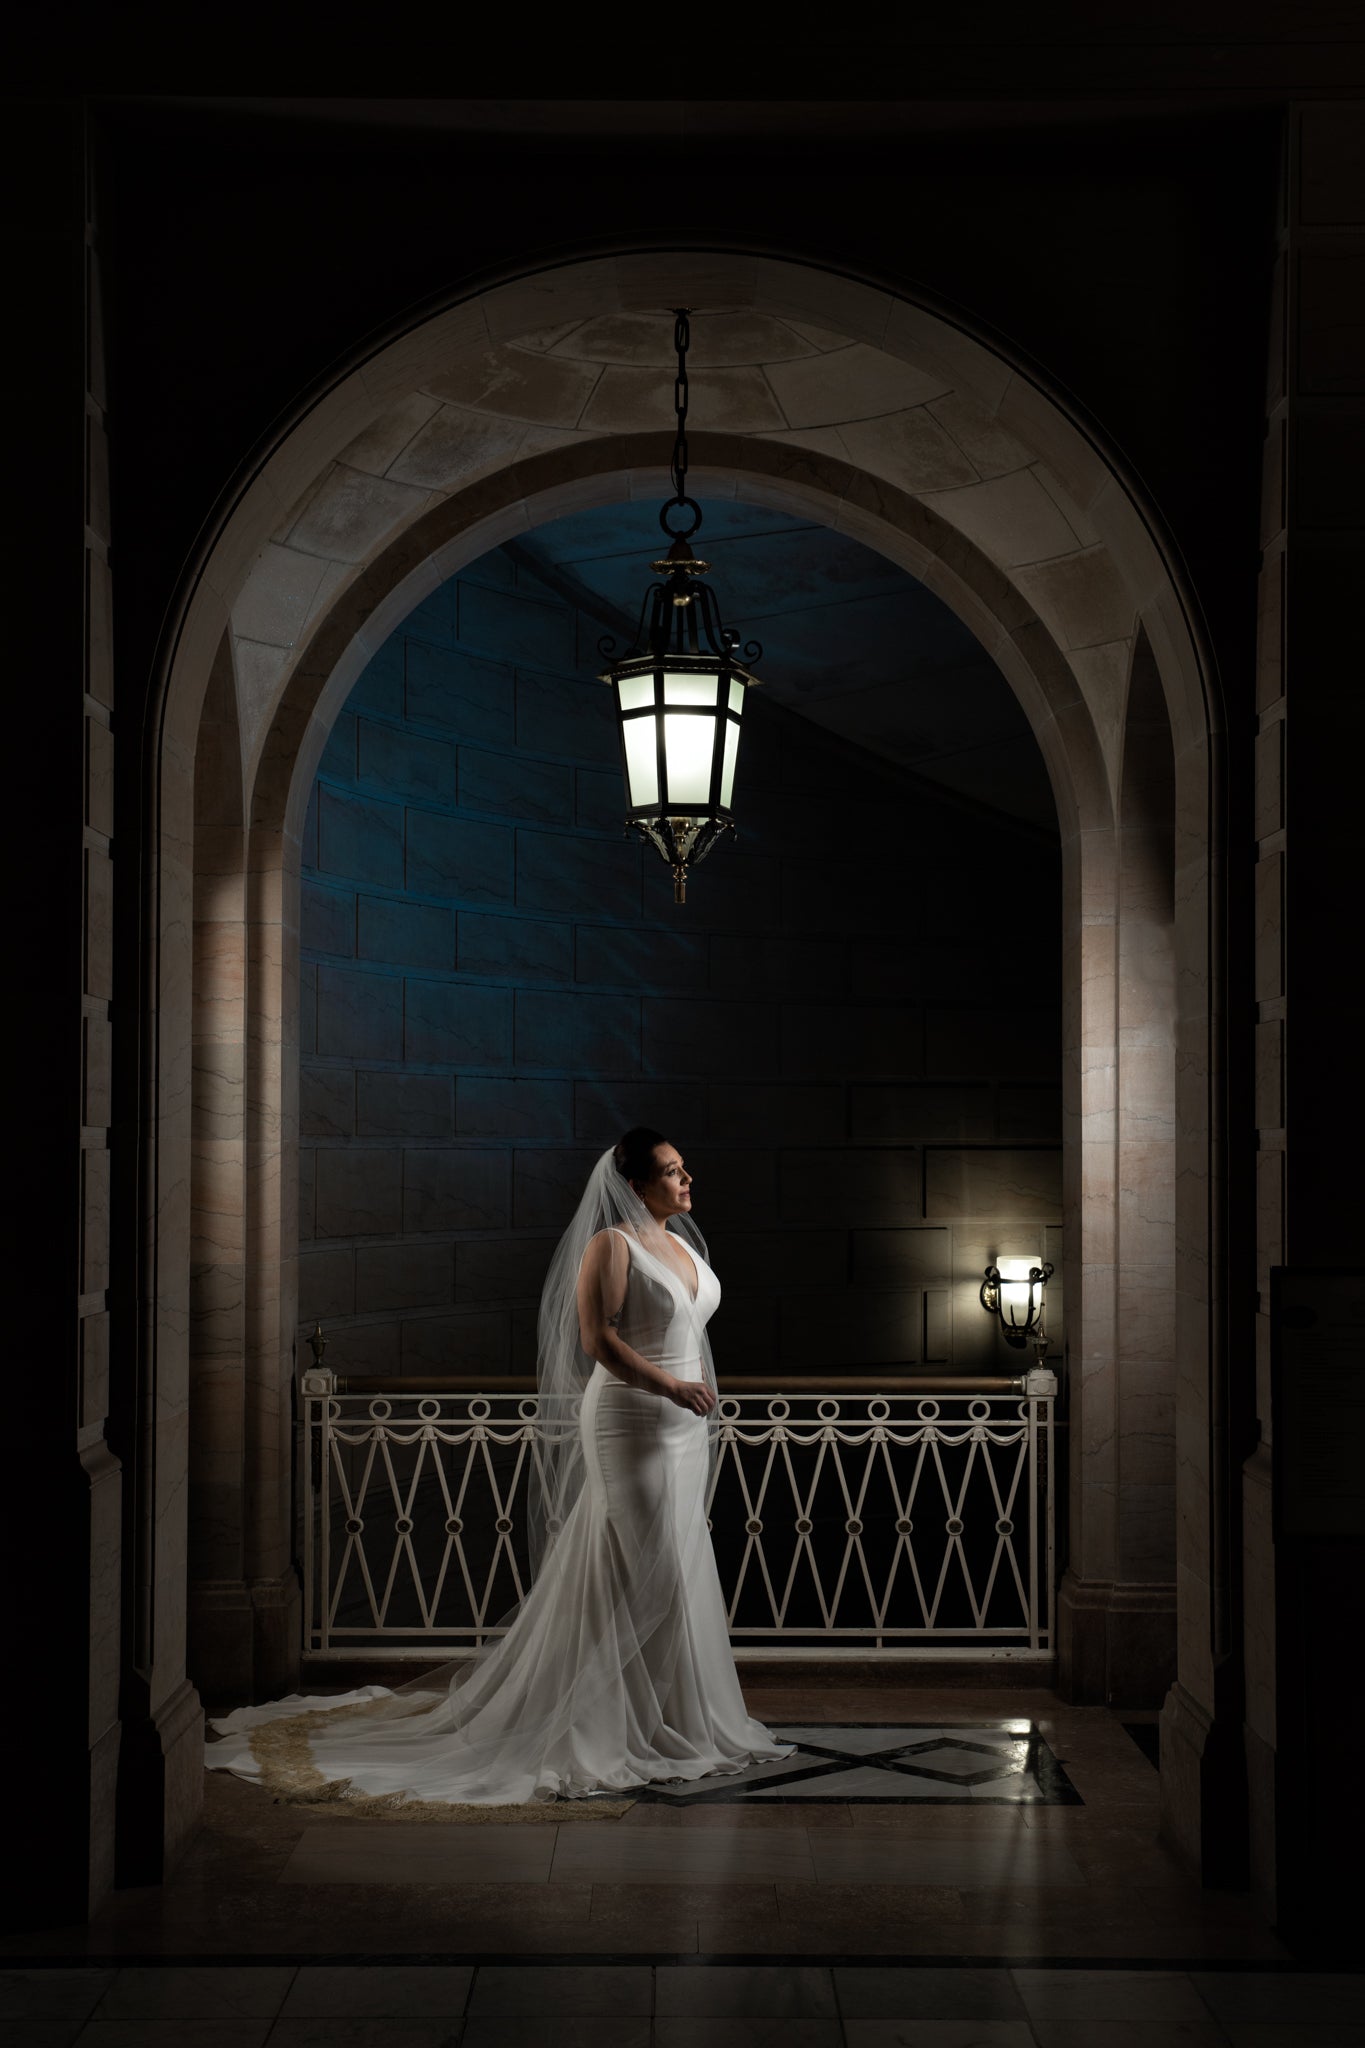 Davina cathedral veil by Dhibi Couture